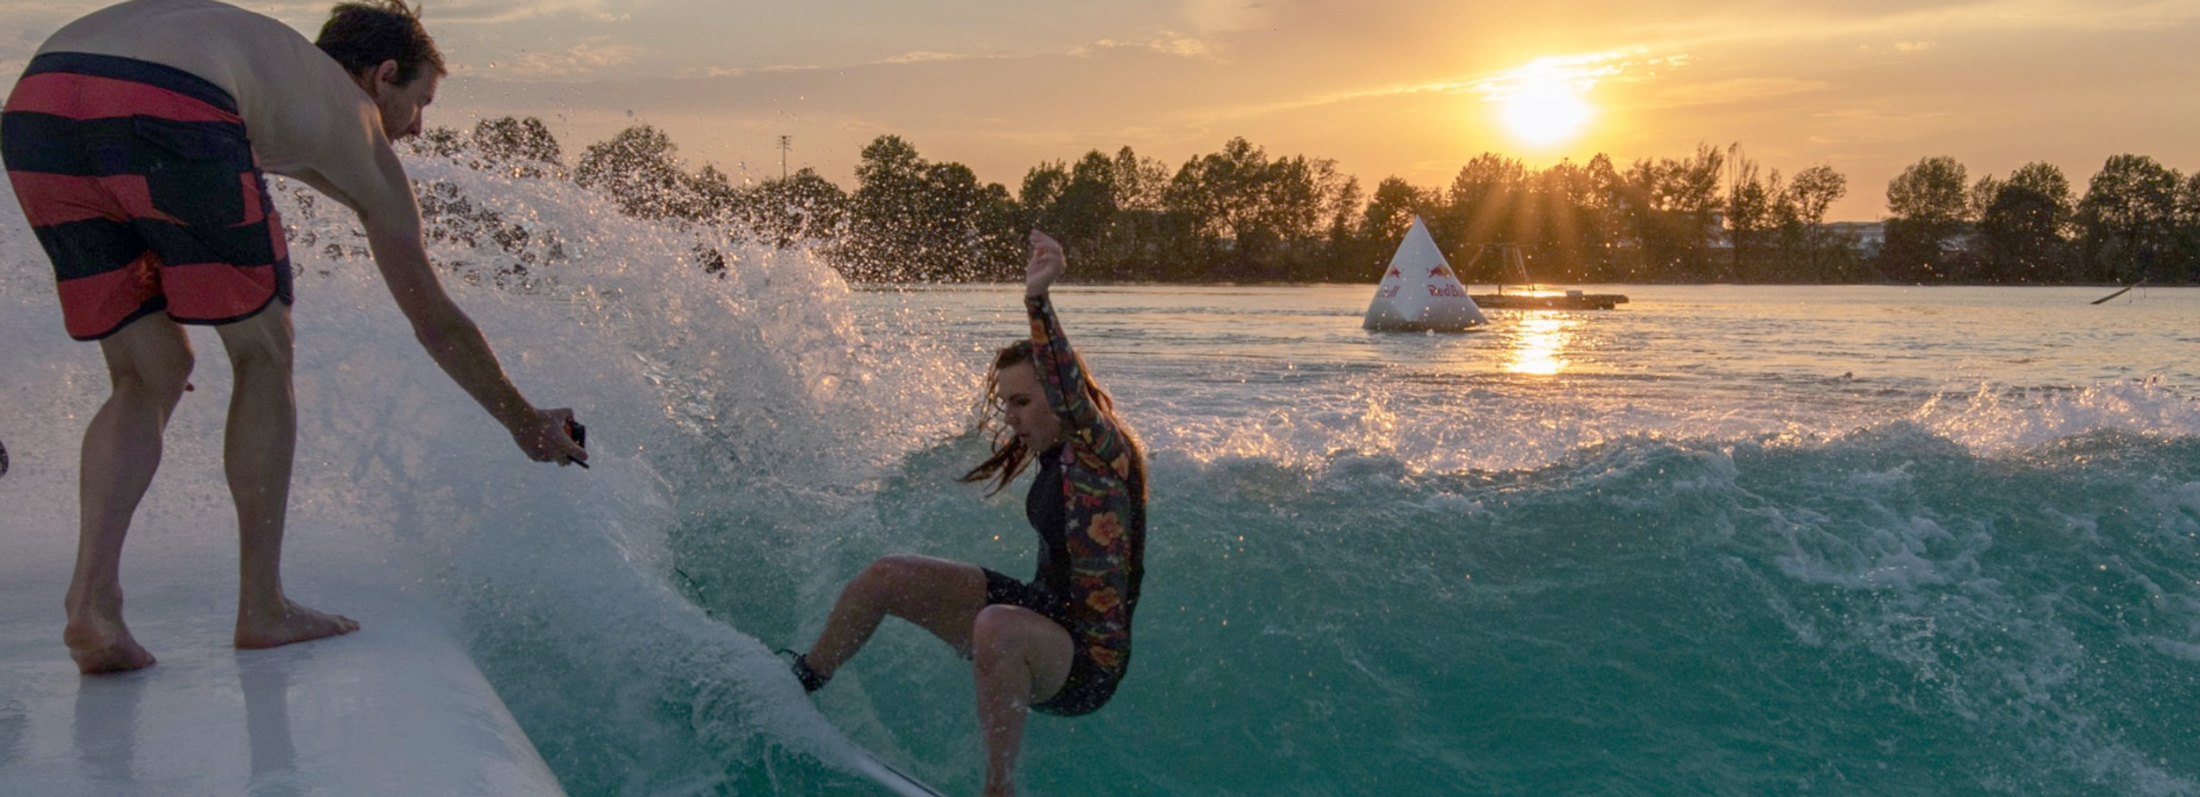 Quirin Rohleder and Laura Haustein surfing UNIT Surf Pool in Italy